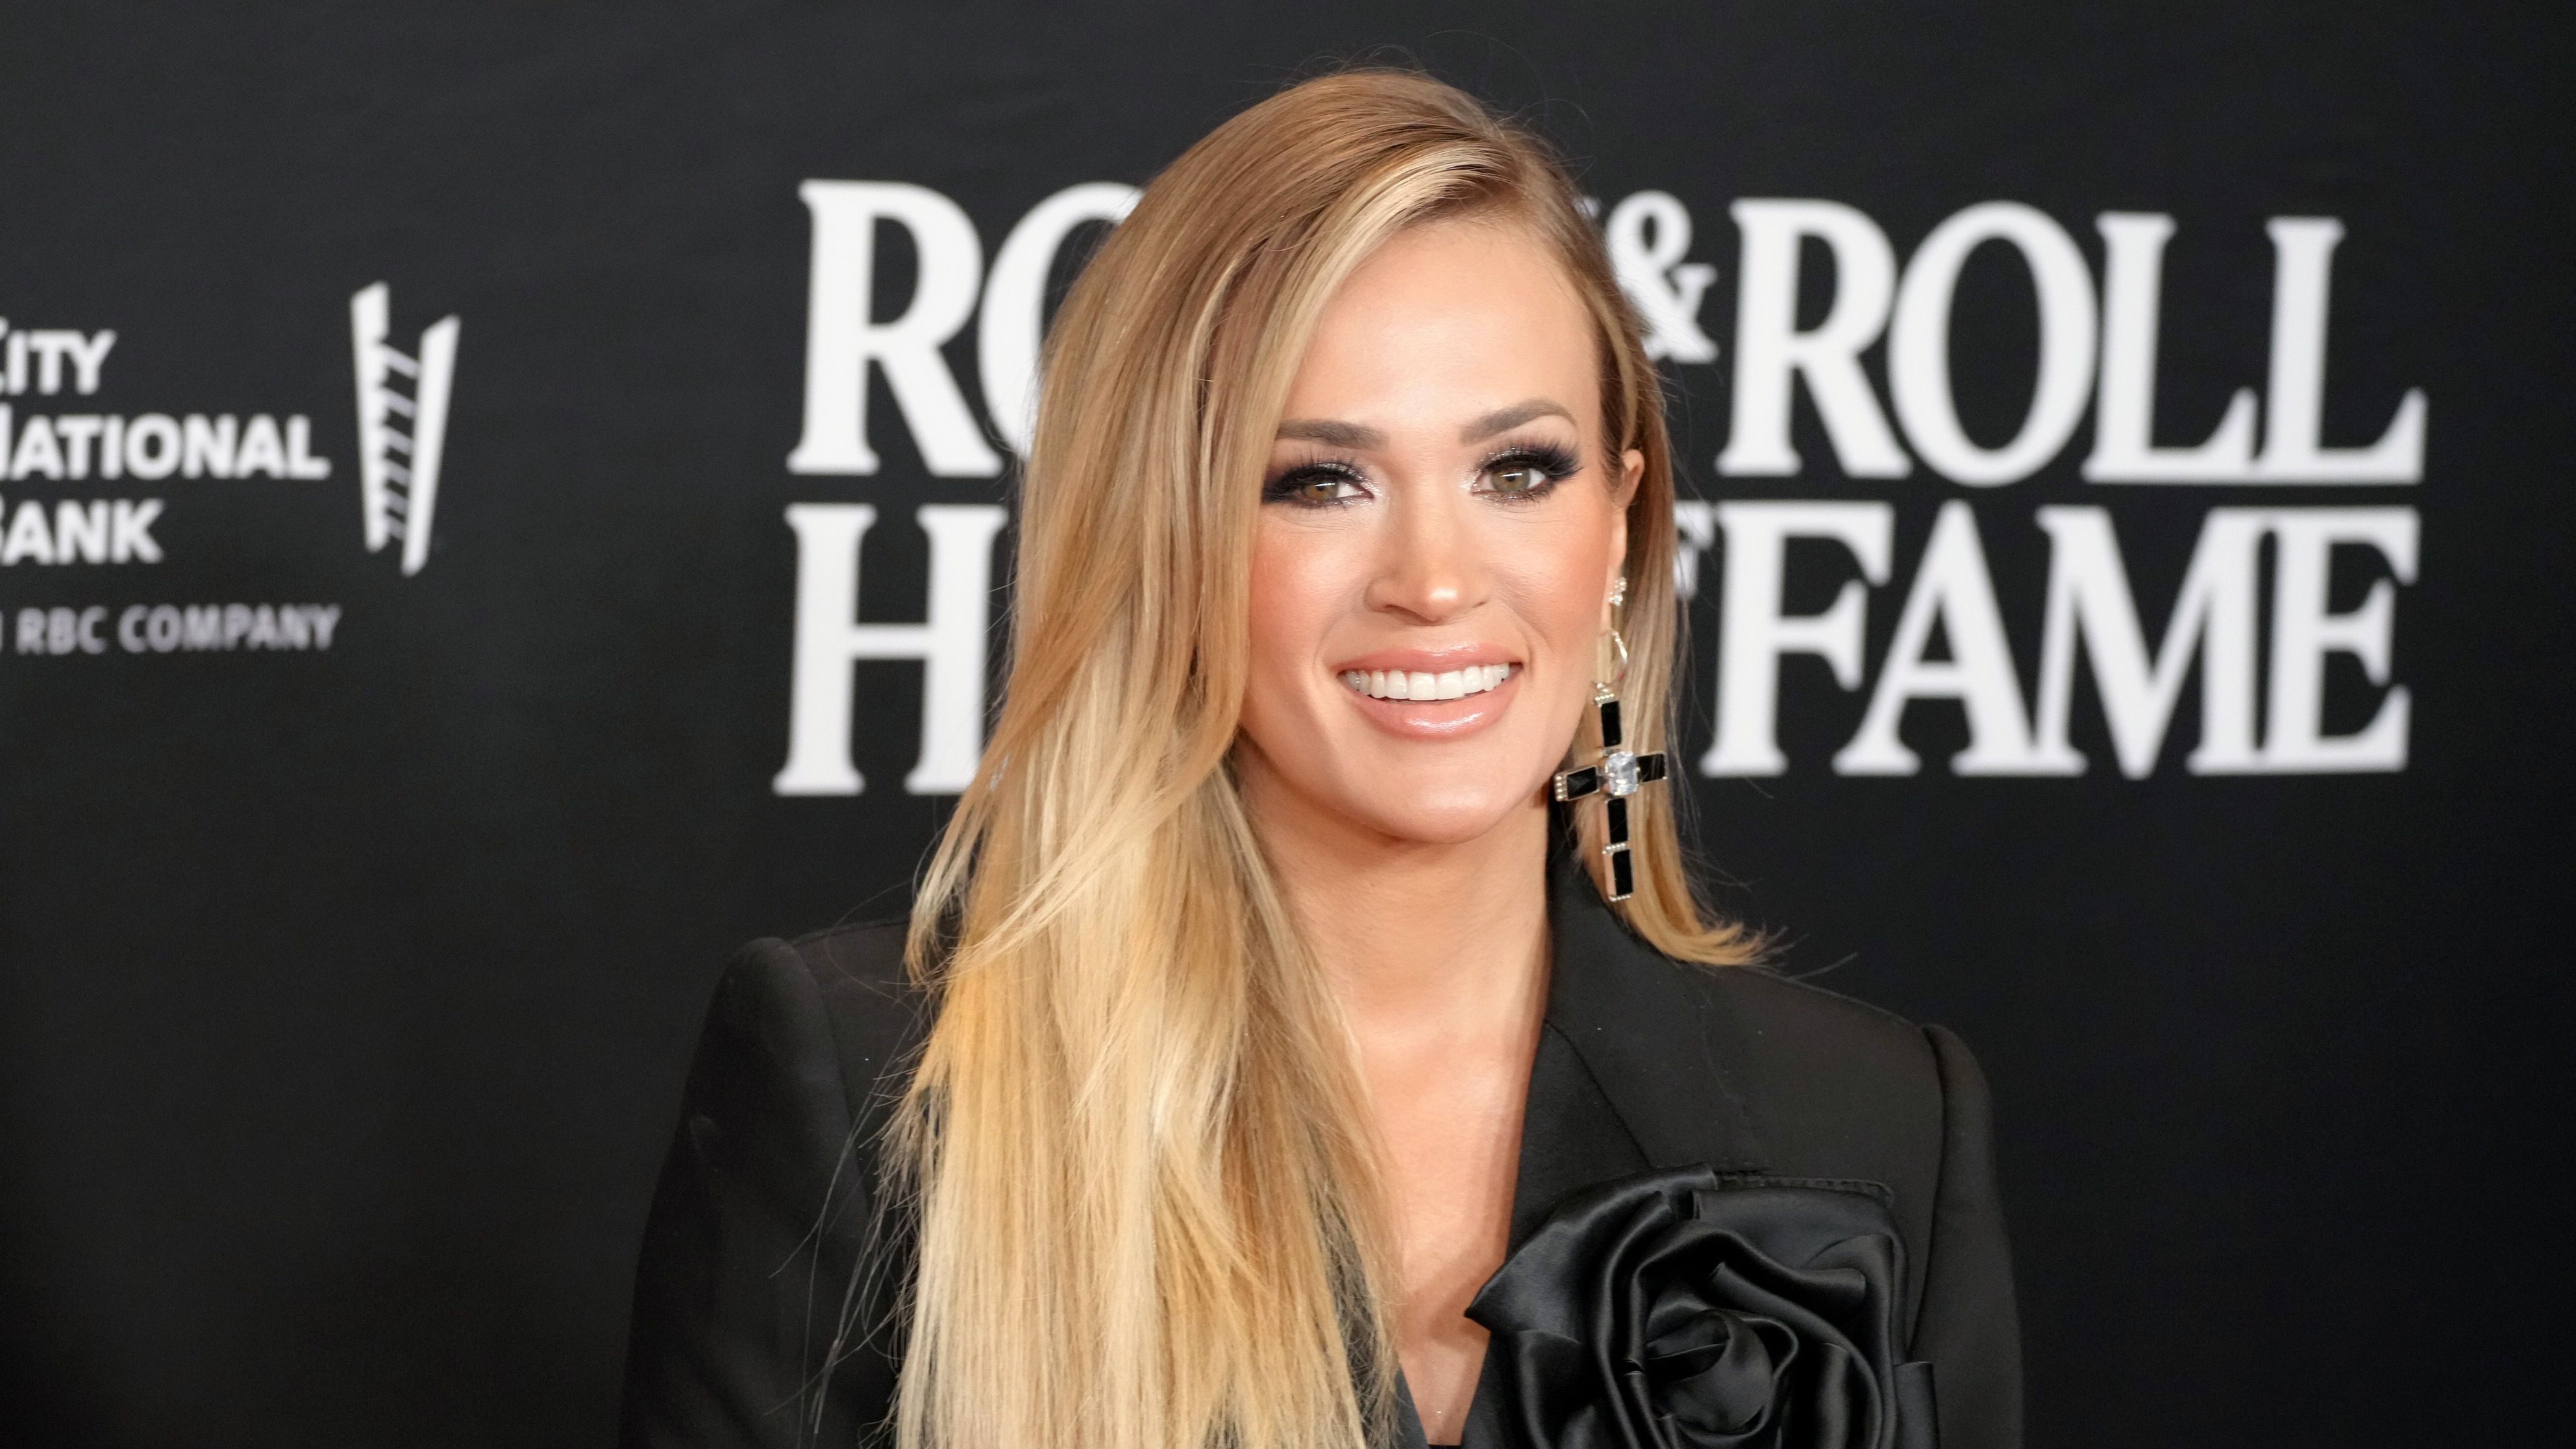 Carrie Underwood to launch activewear line